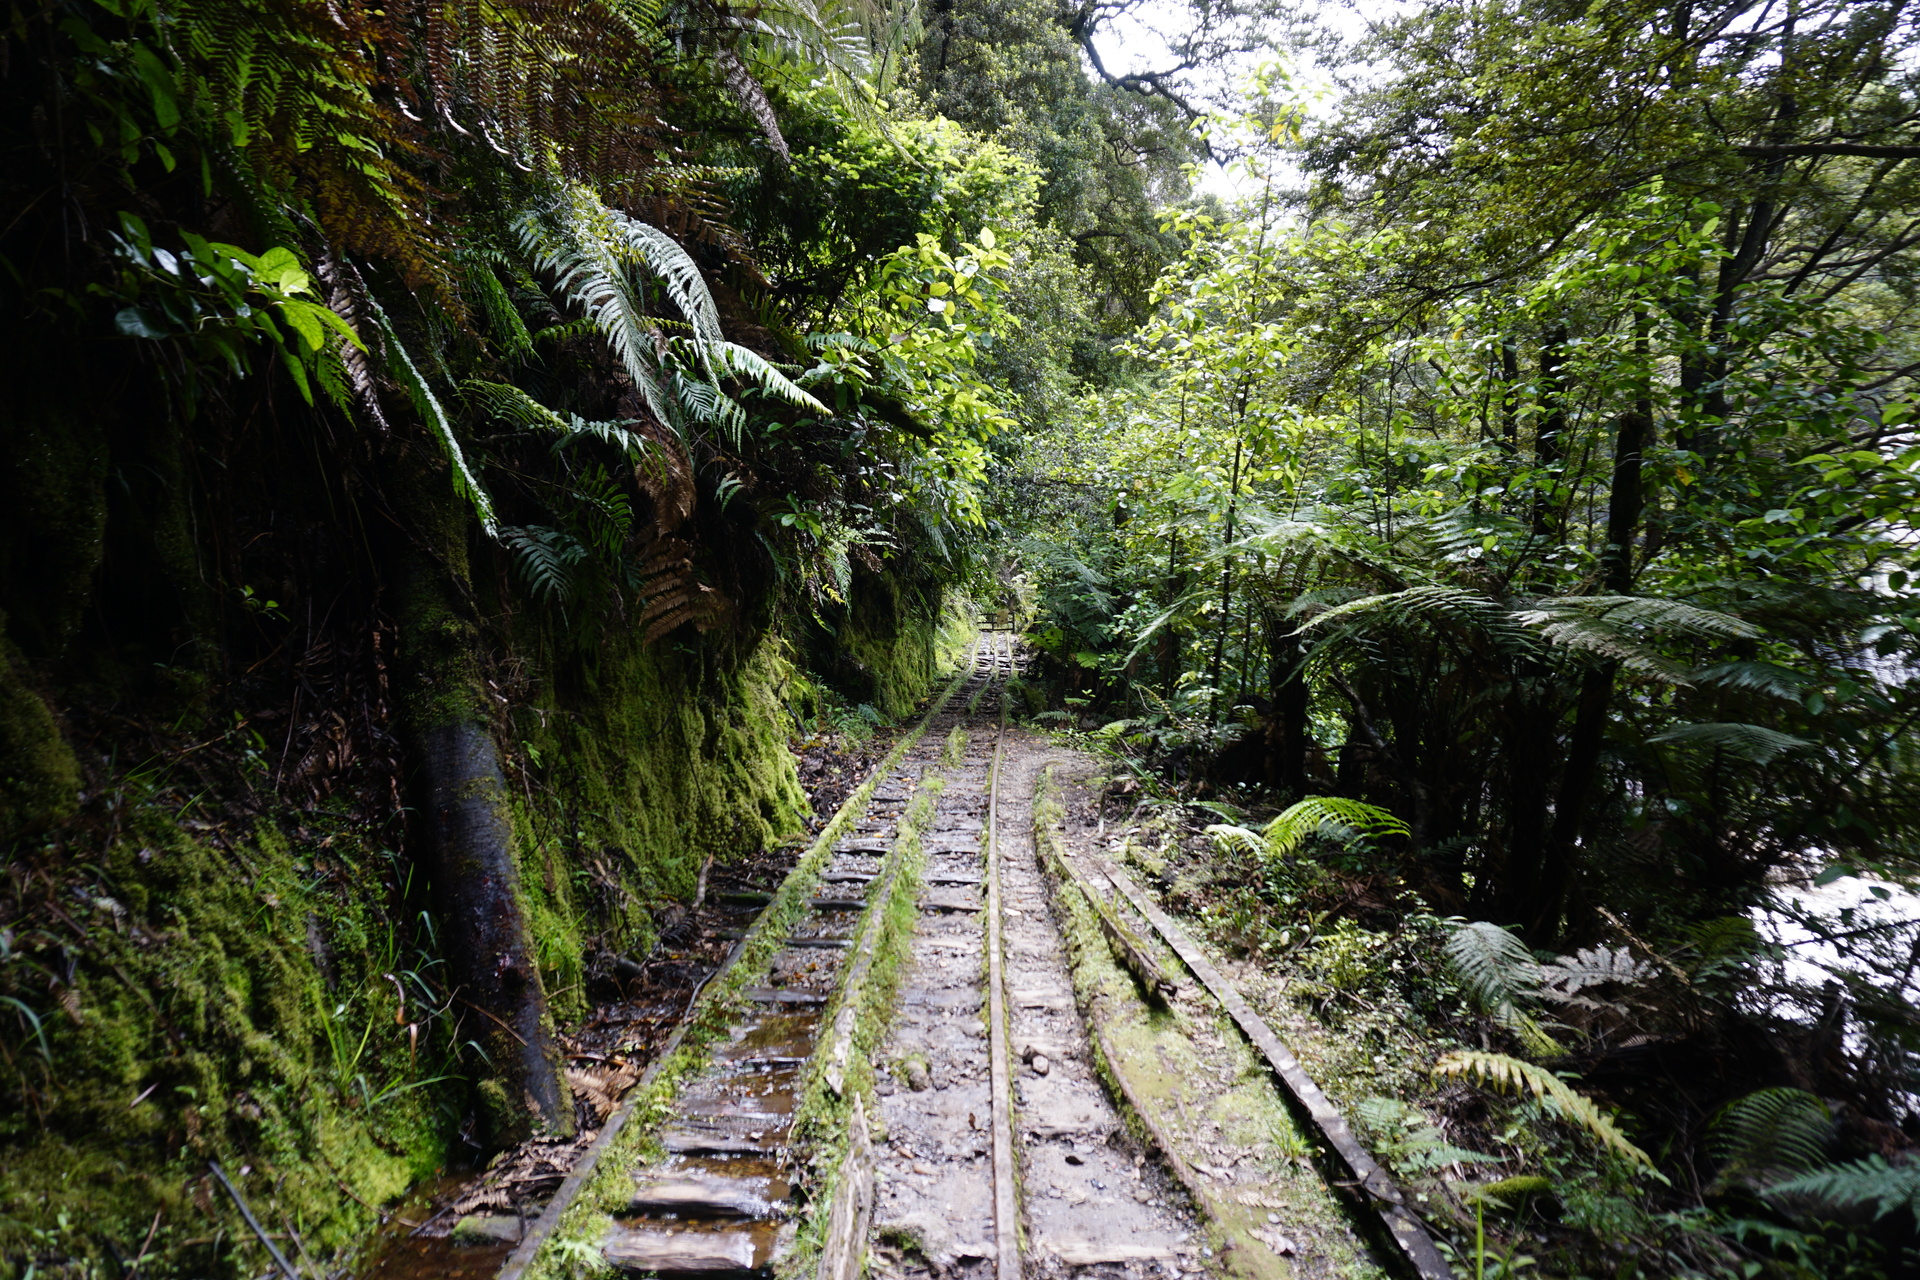 The track follows an old mining cart leading up the valley.